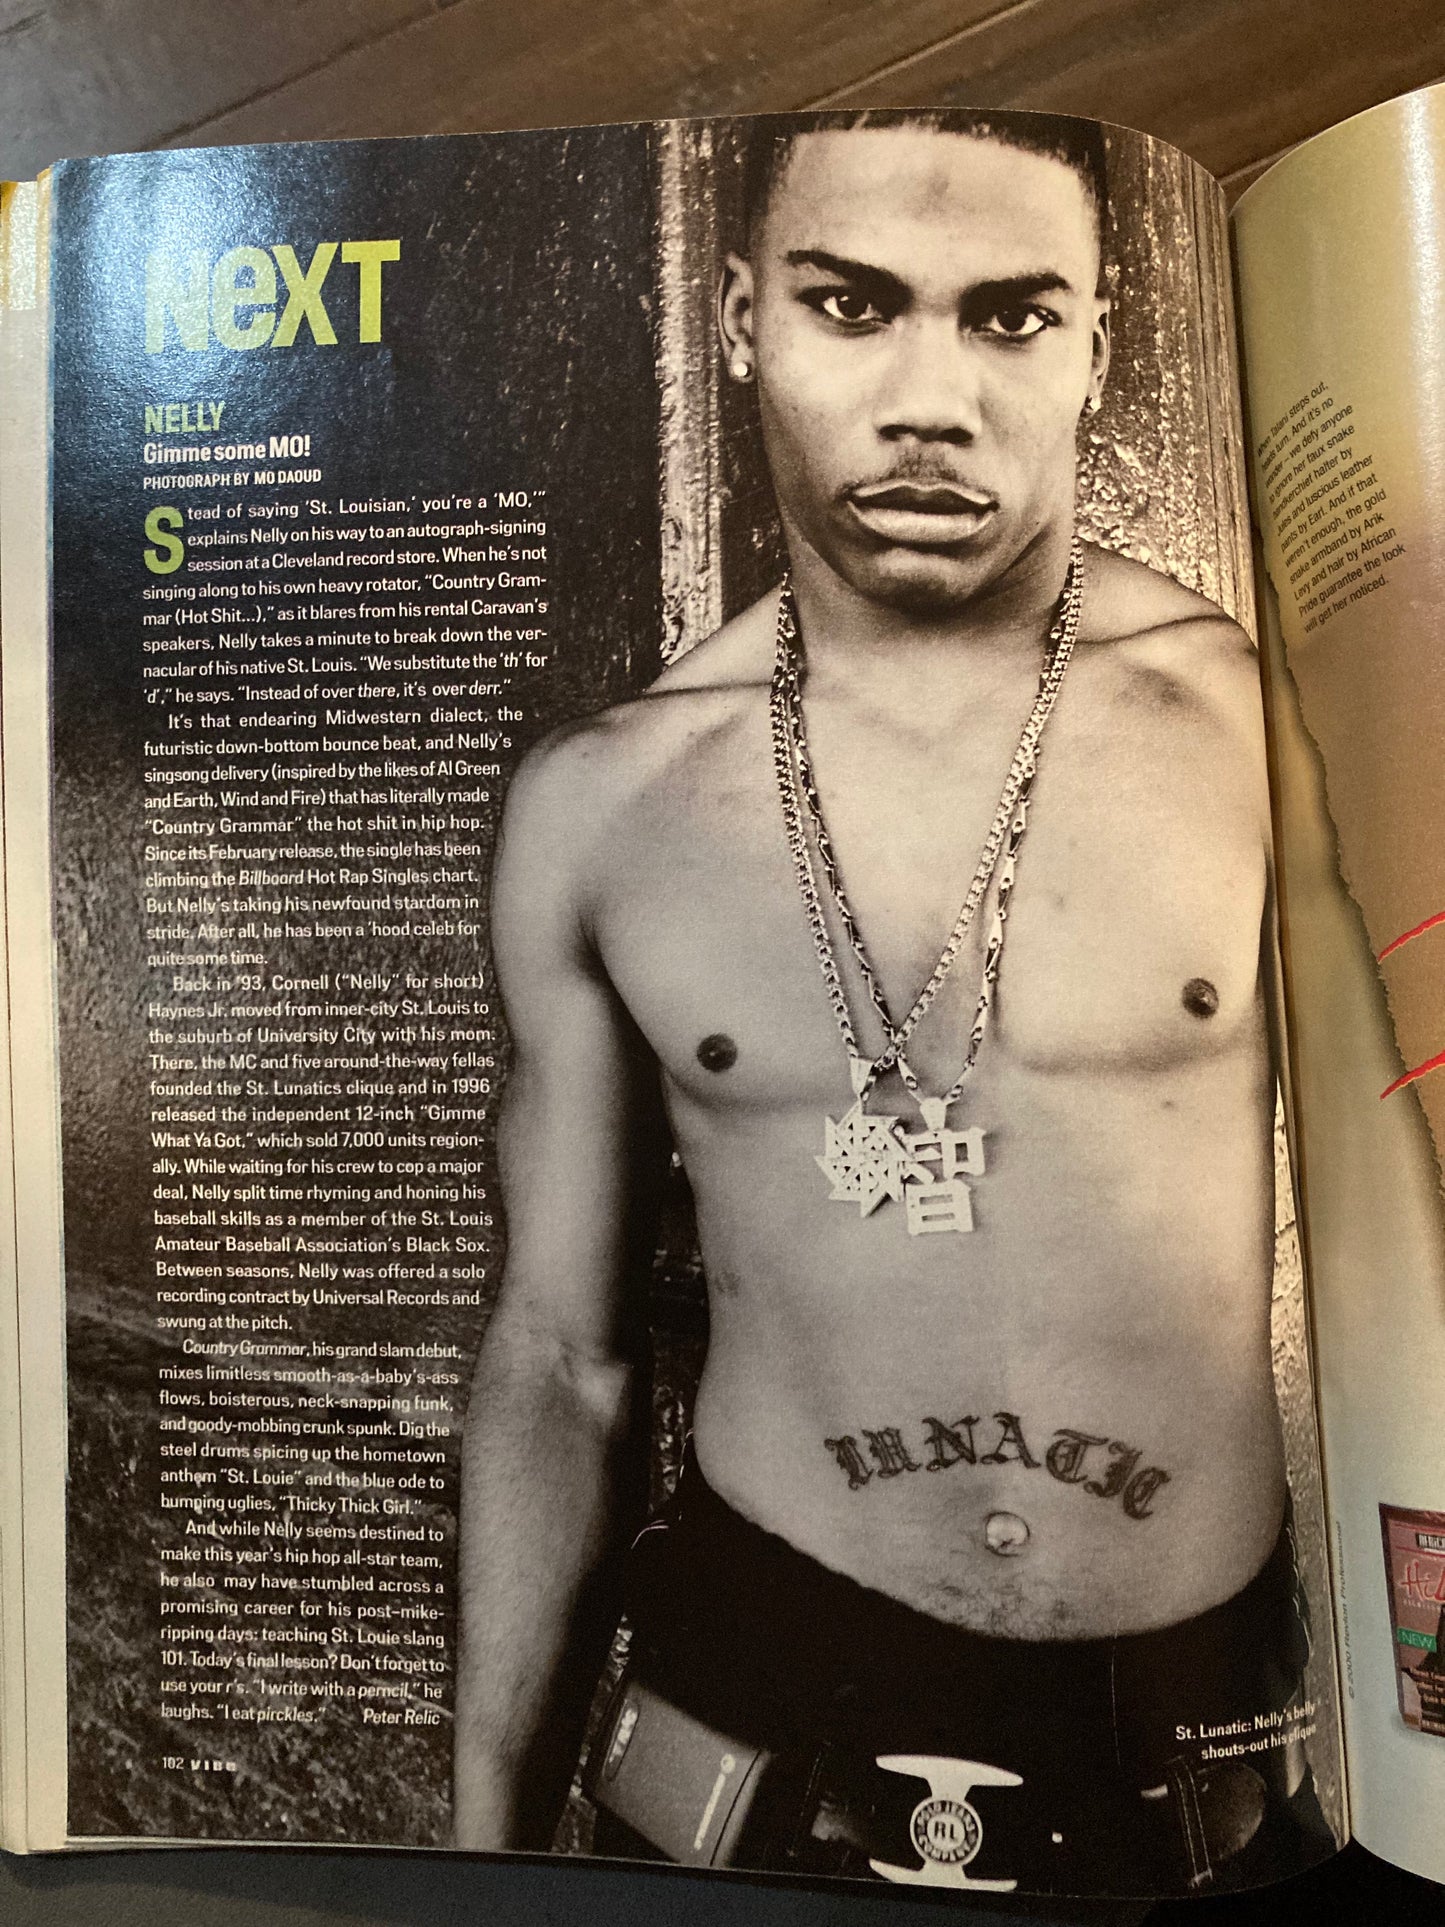 Vibe Magazine August 2000 Busta Rhymes - MoSneaks Shop Online